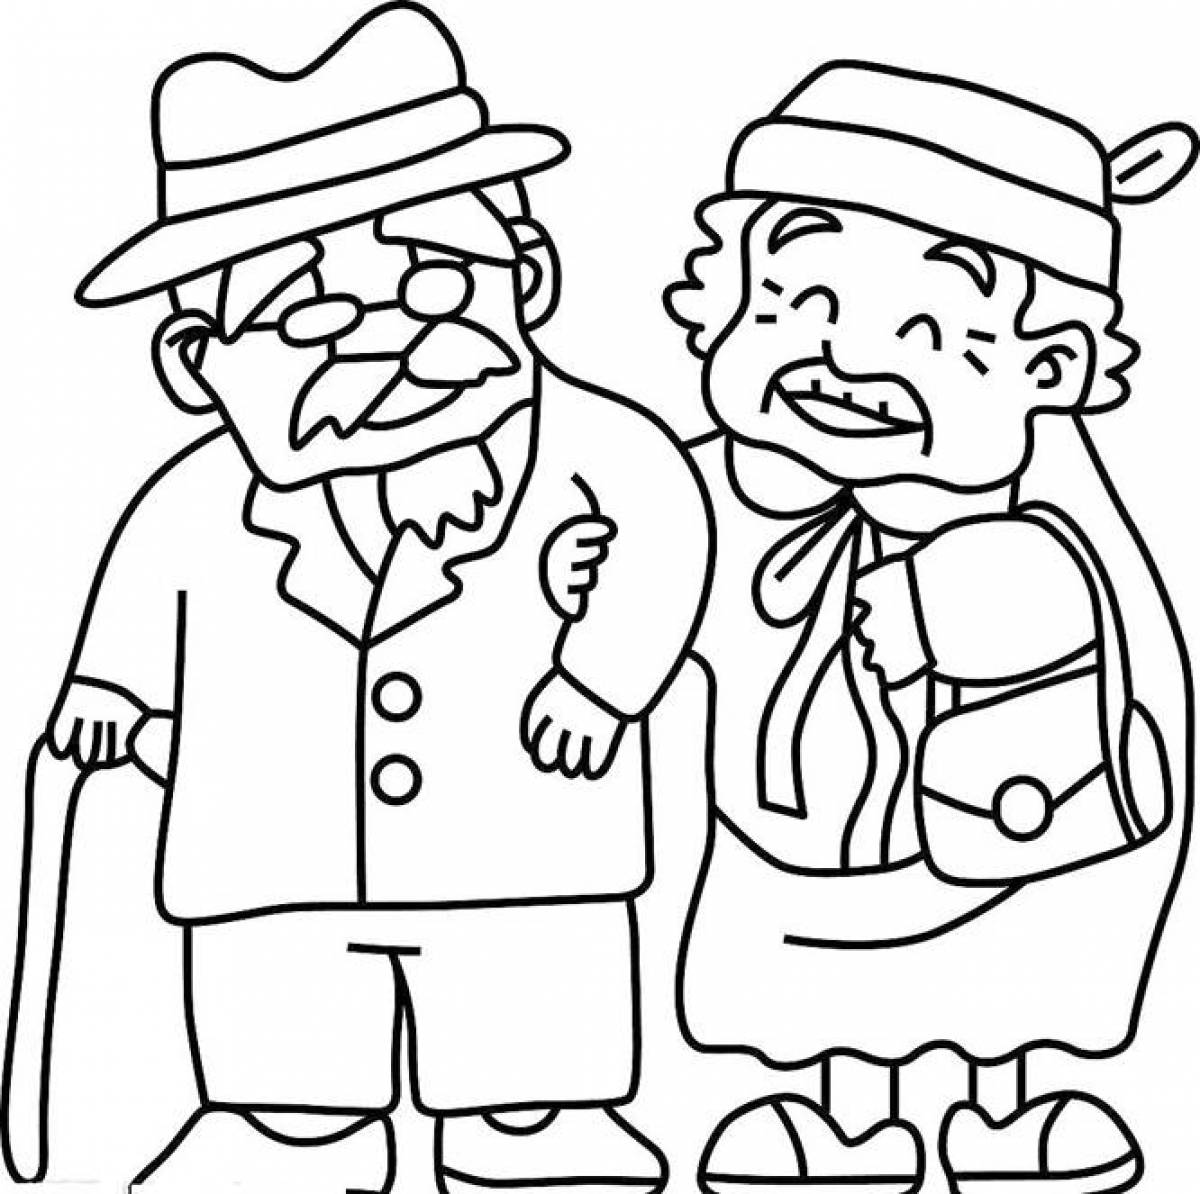 Generous grandfather coloring page